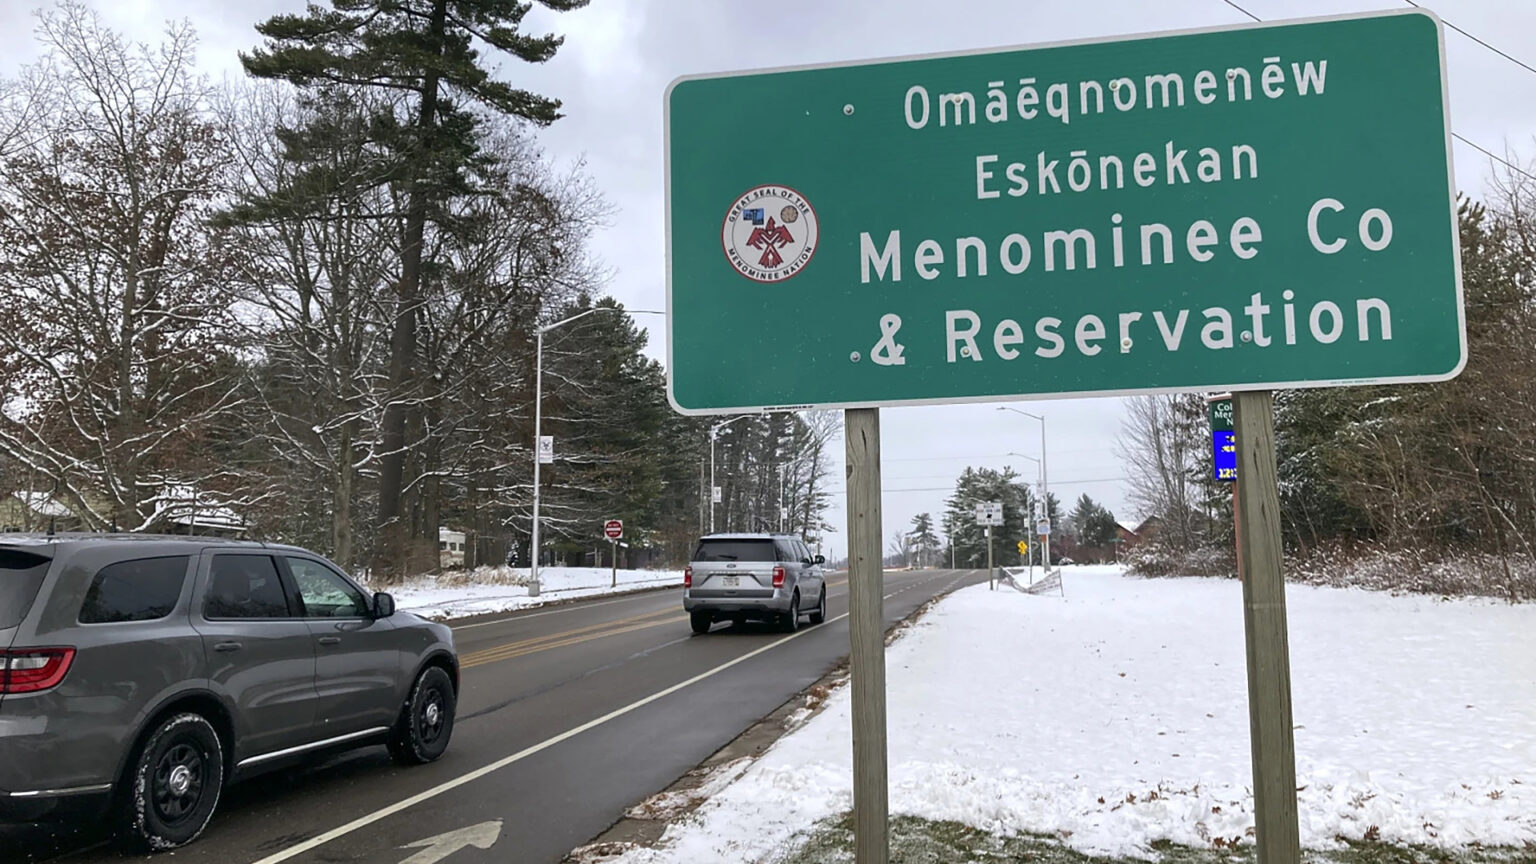 A road sign with the words Omāēqnomenēw Eskōnekan and Menominee Co & Reservation along with the Great Seal of the Menominee Nation stands on wooden posts  in a snow-covered field next to a road with two cars driving past it, with street lights, other signs and trees in the background.